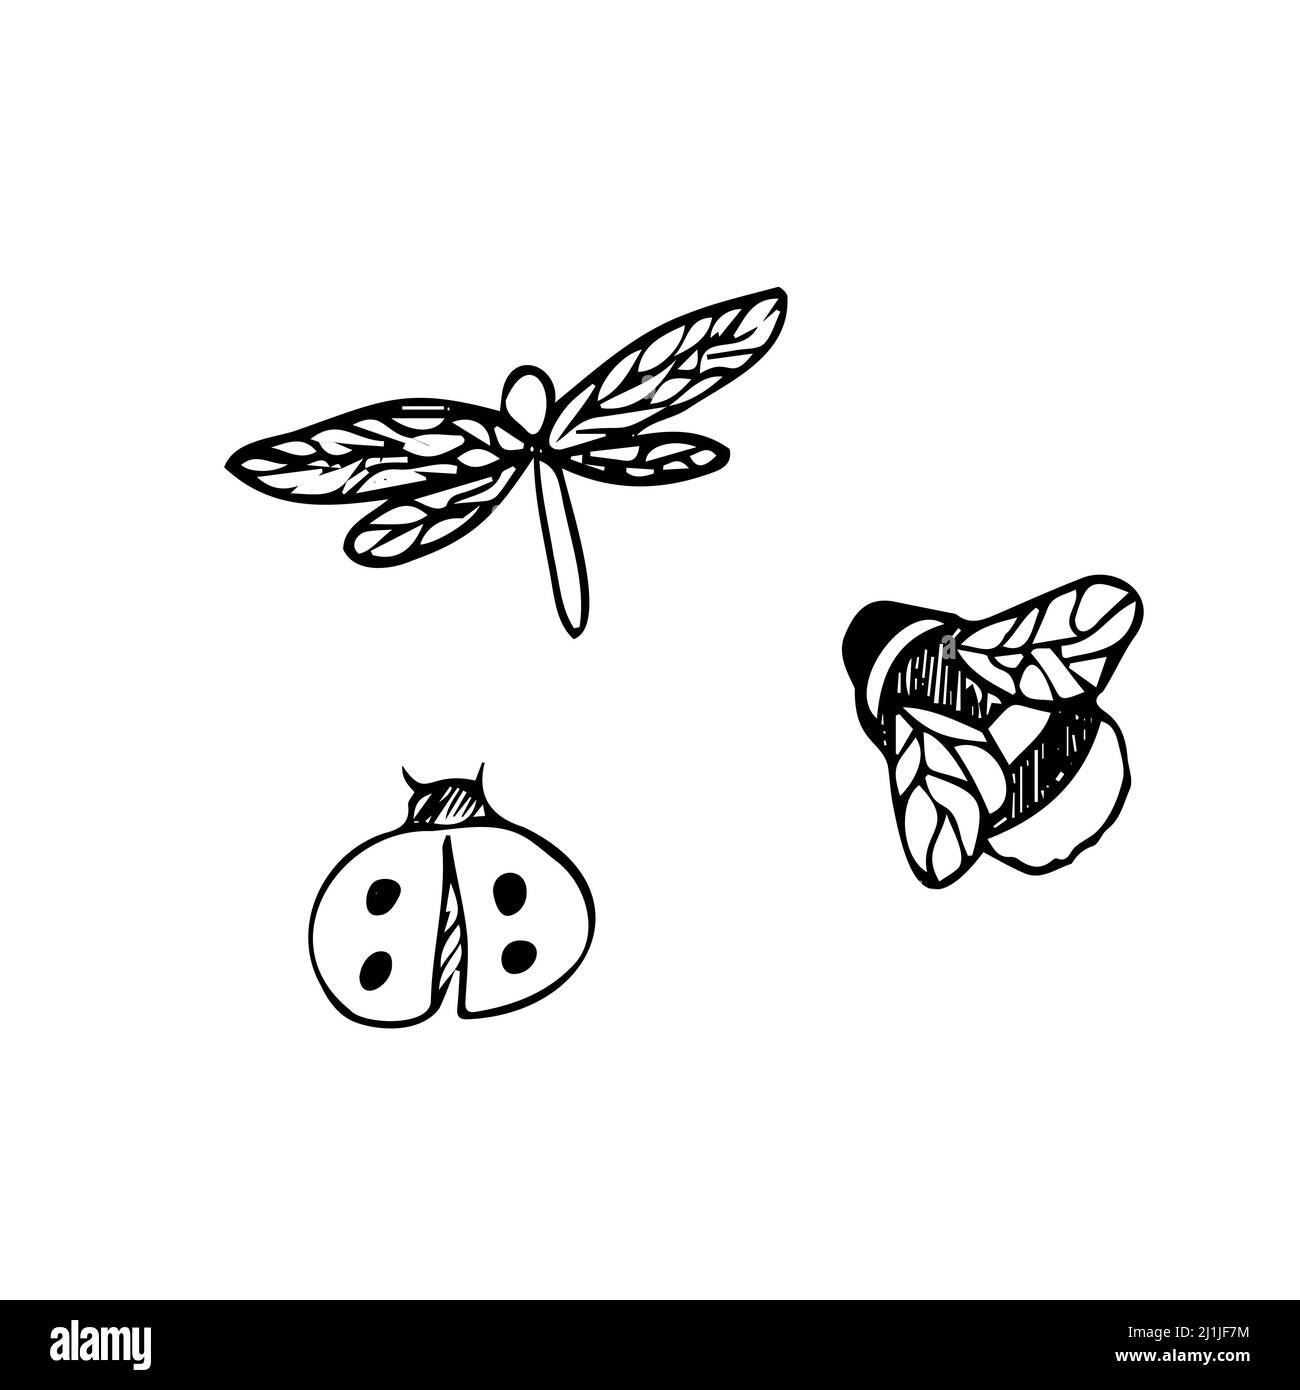 Insect collection. Dragonfly, Ladybug, Bumblebee Vector Drawn by hand Stock Vector